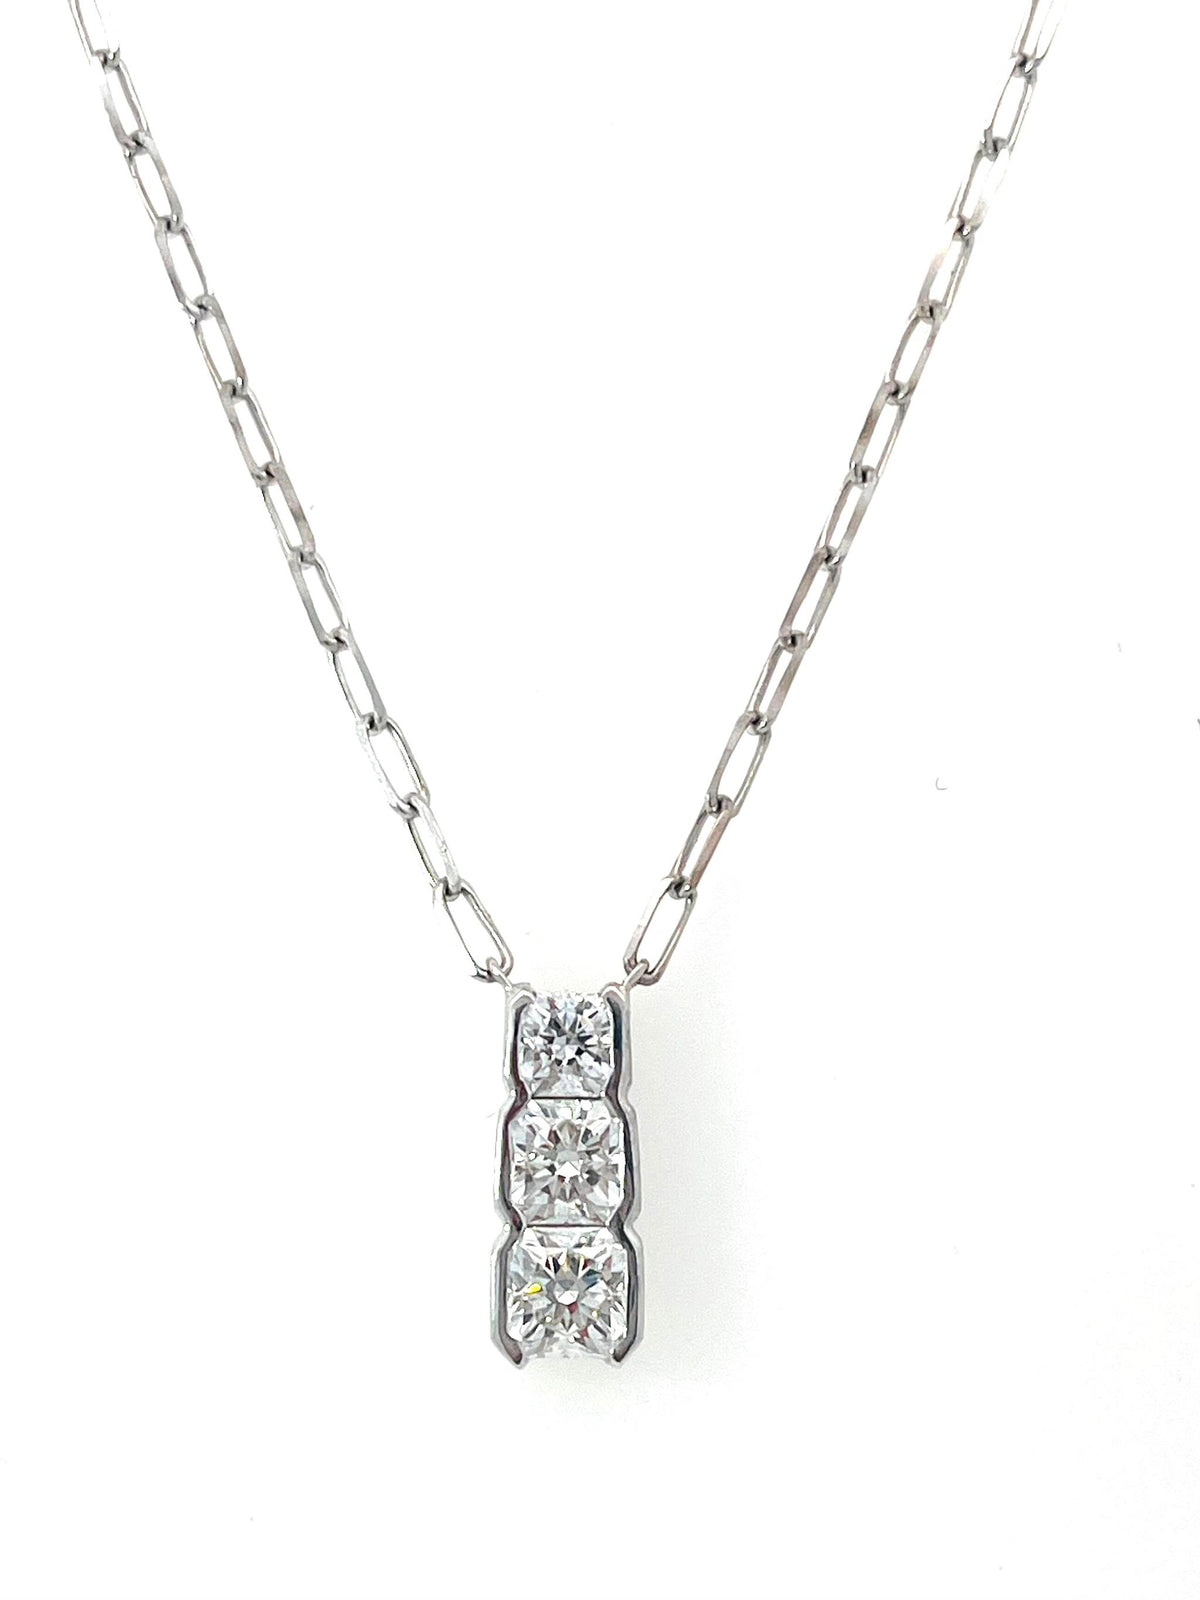 14Kt White Gold 3-Stone Graduated Ladder Pendant With 1.44cttw Natural Diamonds